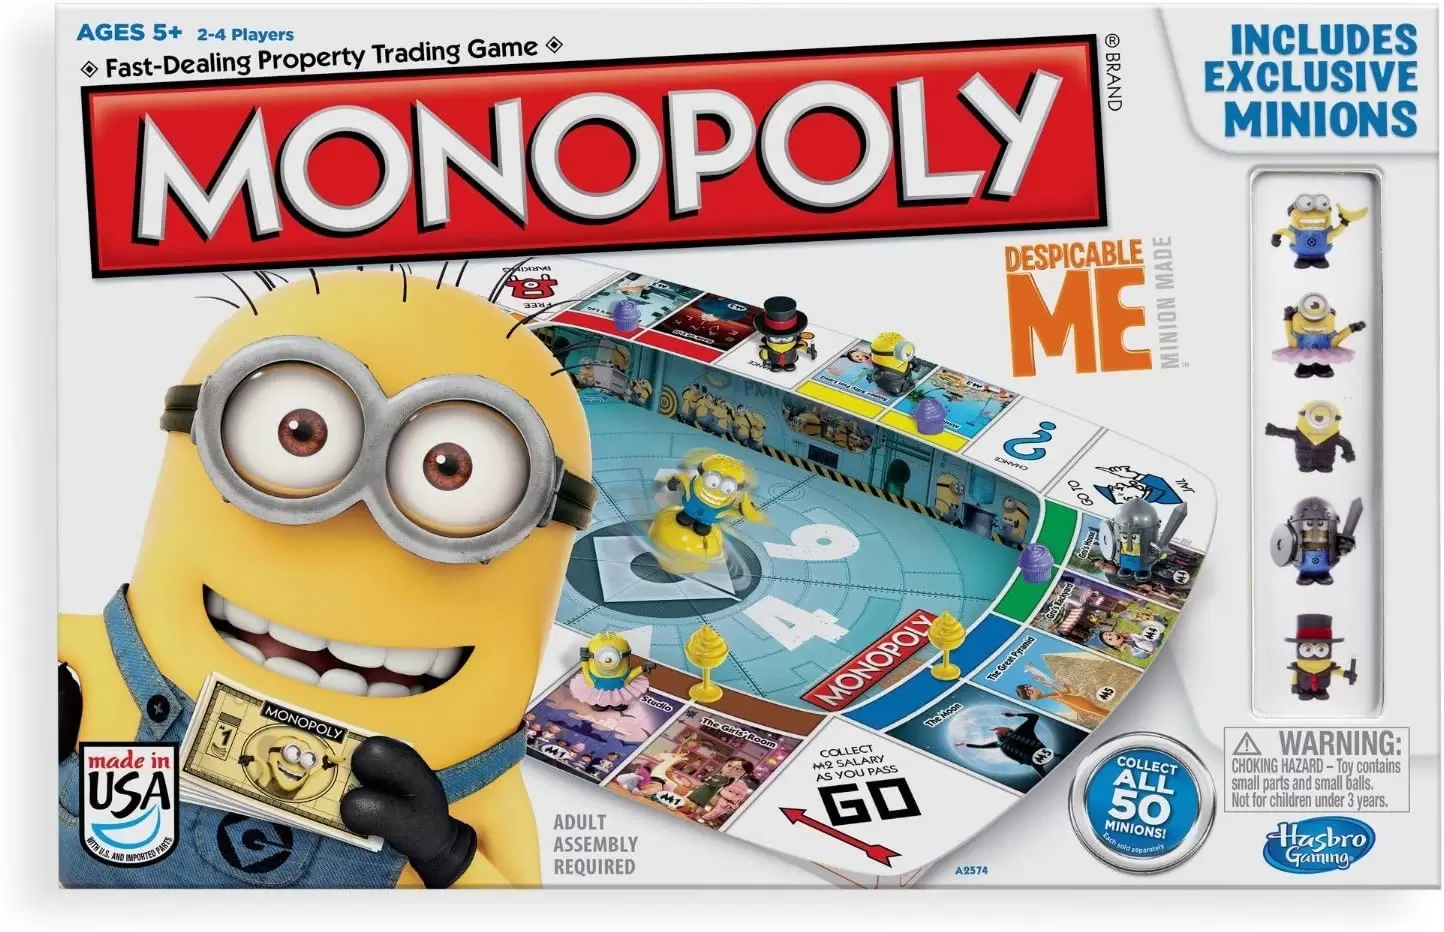 Monopoly Movies & TV Series - Monopoly Despicable Me 2